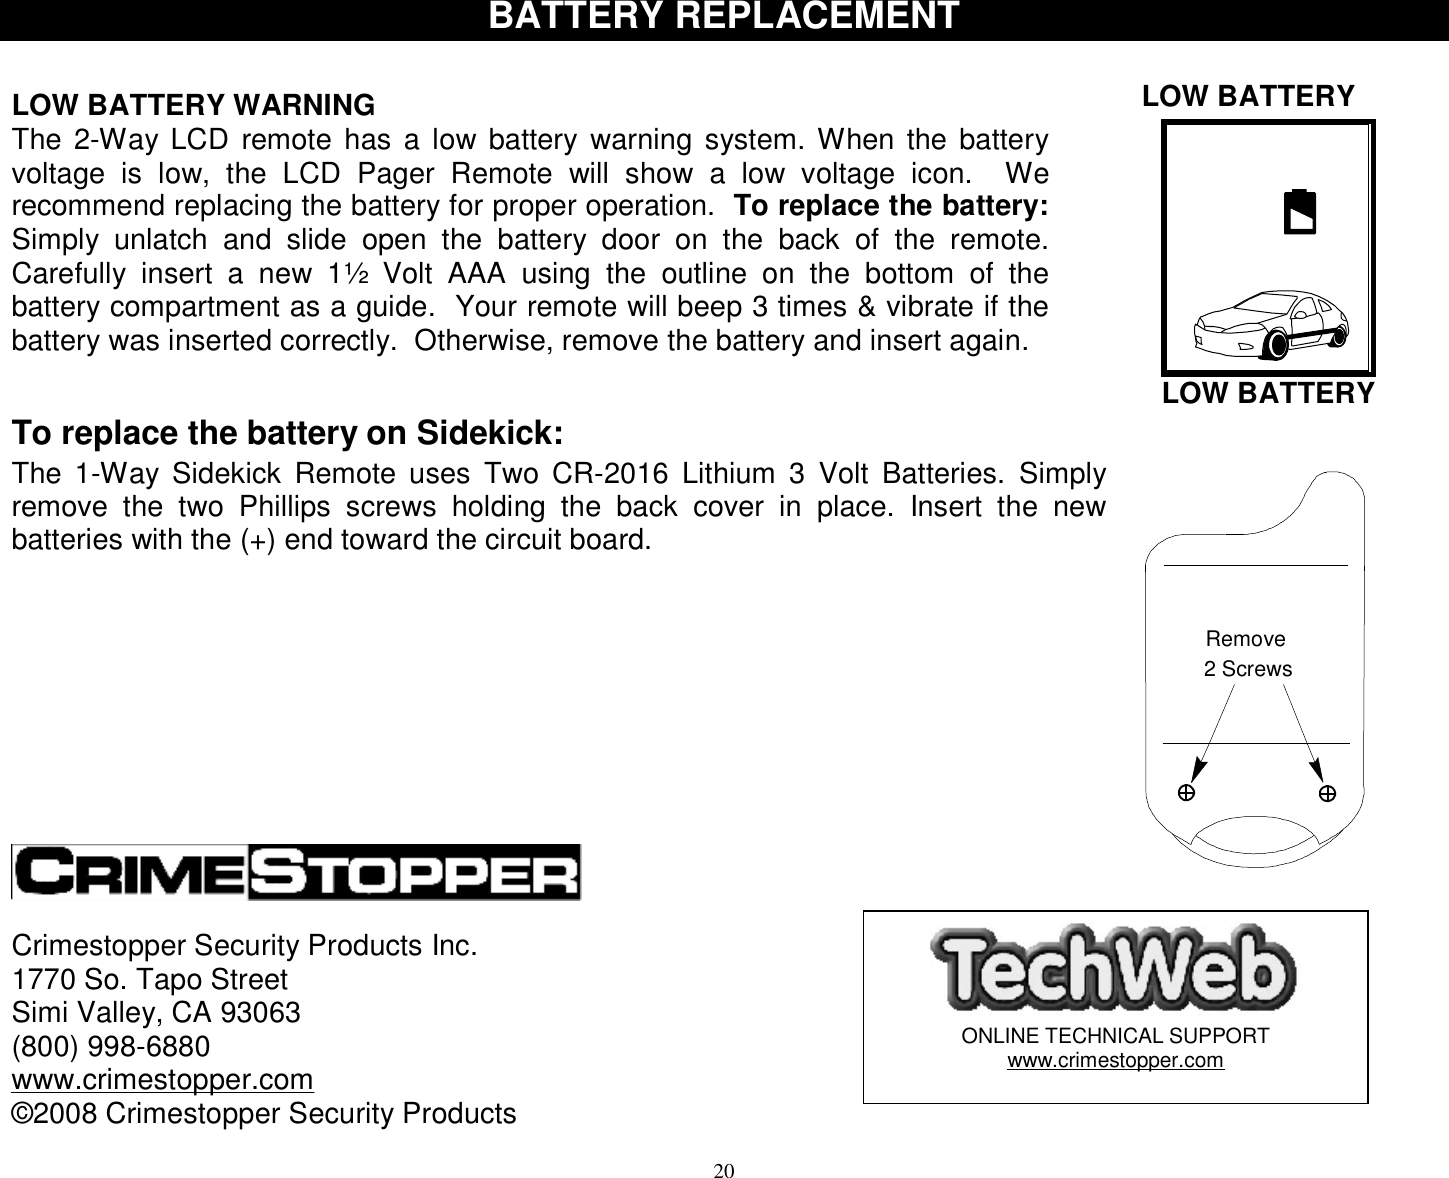  20  LOW BATTERY 2 ScrewsRemove   LOW BATTERY BATTERY REPLACEMENT   LOW BATTERY WARNING The 2-Way LCD remote has a low battery warning system. When the battery voltage is low, the LCD Pager Remote will show a low voltage icon.  We recommend replacing the battery for proper operation.  To replace the battery: Simply unlatch and slide open the battery door on the back of the remote.  Carefully insert a new 1½ Volt AAA using the outline on the bottom of the battery compartment as a guide.  Your remote will beep 3 times &amp; vibrate if the battery was inserted correctly.  Otherwise, remove the battery and insert again.   To replace the battery on Sidekick: The 1-Way Sidekick Remote uses Two CR-2016 Lithium 3 Volt Batteries. Simply remove the two Phillips screws holding the back cover in place. Insert the new batteries with the (+) end toward the circuit board.                        Crimestopper Security Products Inc. 1770 So. Tapo Street Simi Valley, CA 93063 (800) 998-6880 www.crimestopper.com ©2008 Crimestopper Security Products  ONLINE TECHNICAL SUPPORT www.crimestopper.com 